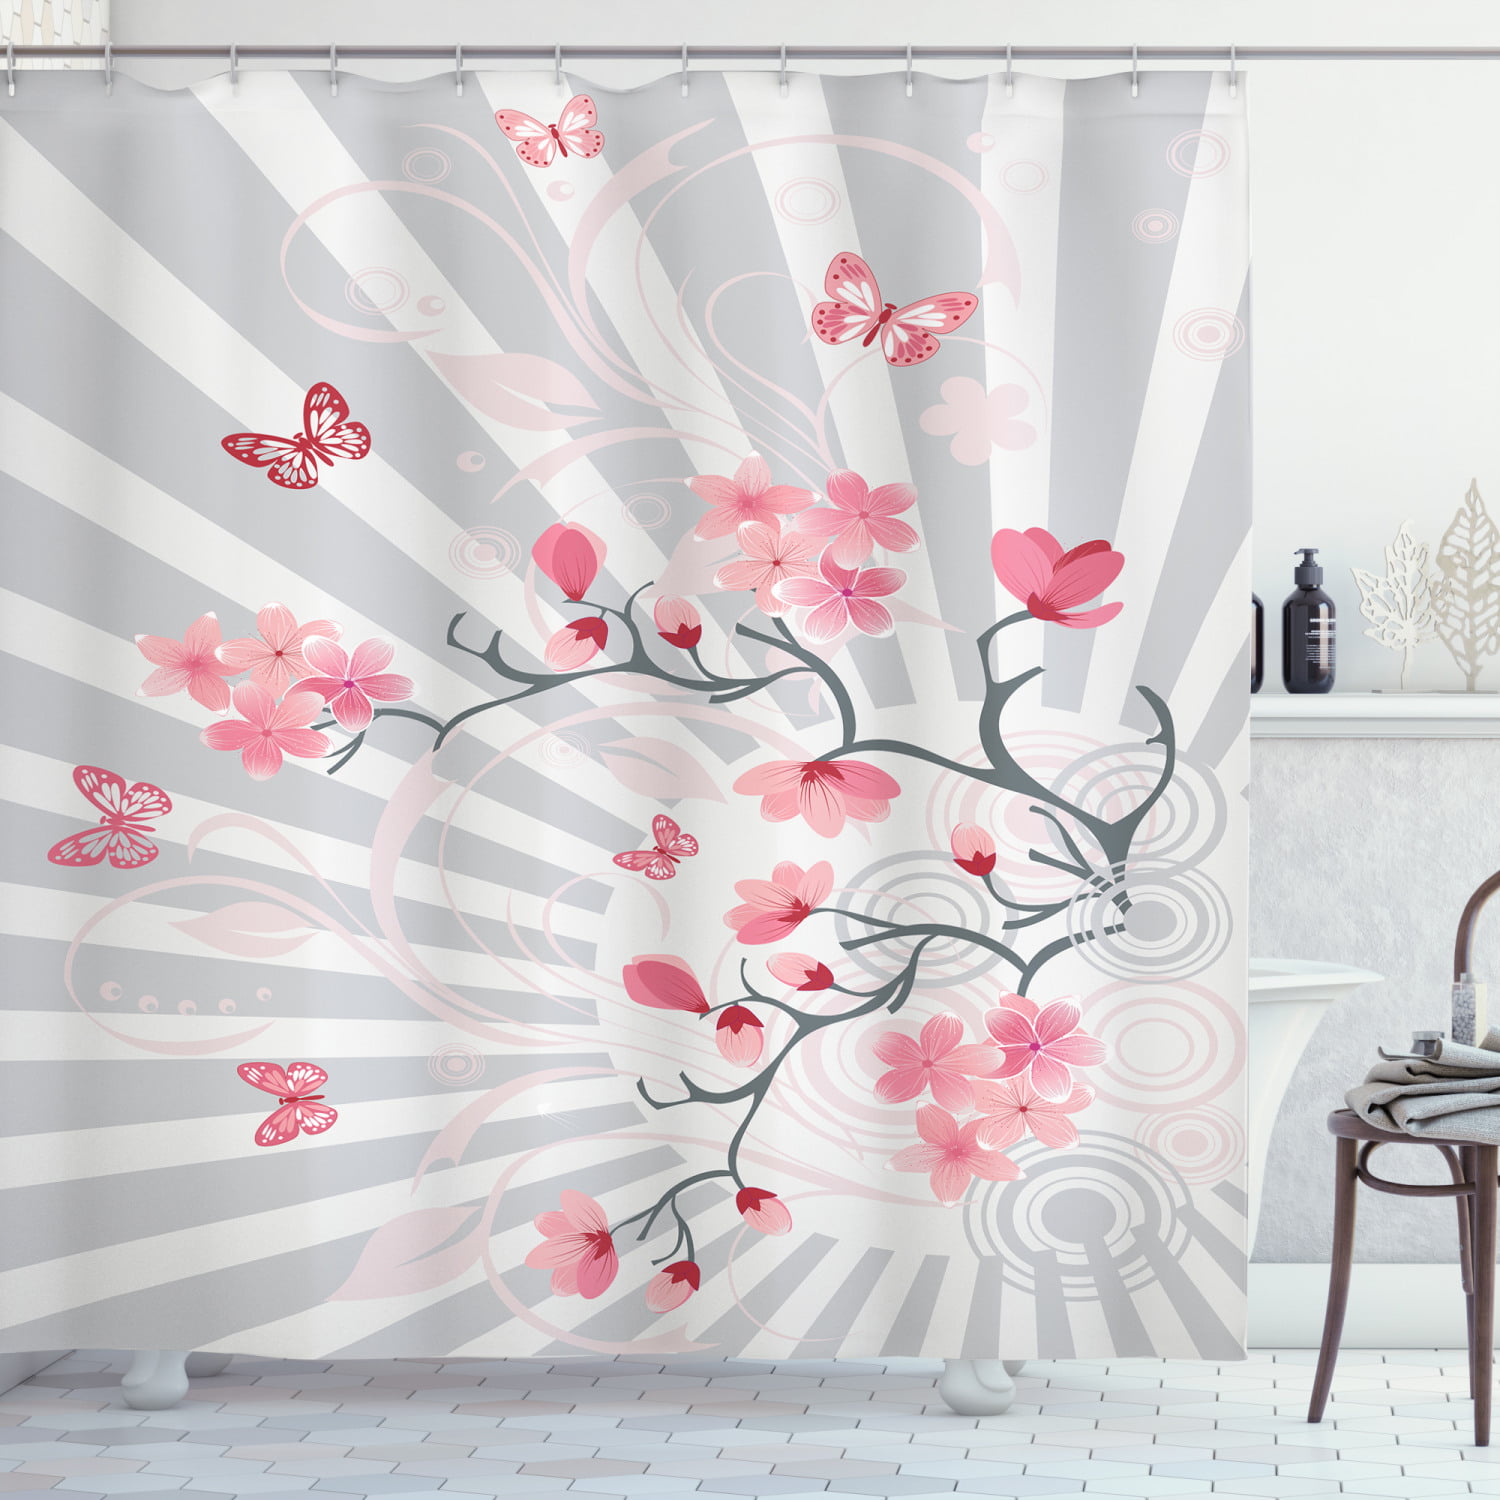 Ambesonne Butterfly Shower Curtain Light Pink Pastel Colored Blossoming Roses with Spring Season Insects Romantic Feminine 69 W x 84 L Cloth Fabric Bathroom Decor Set with Hooks